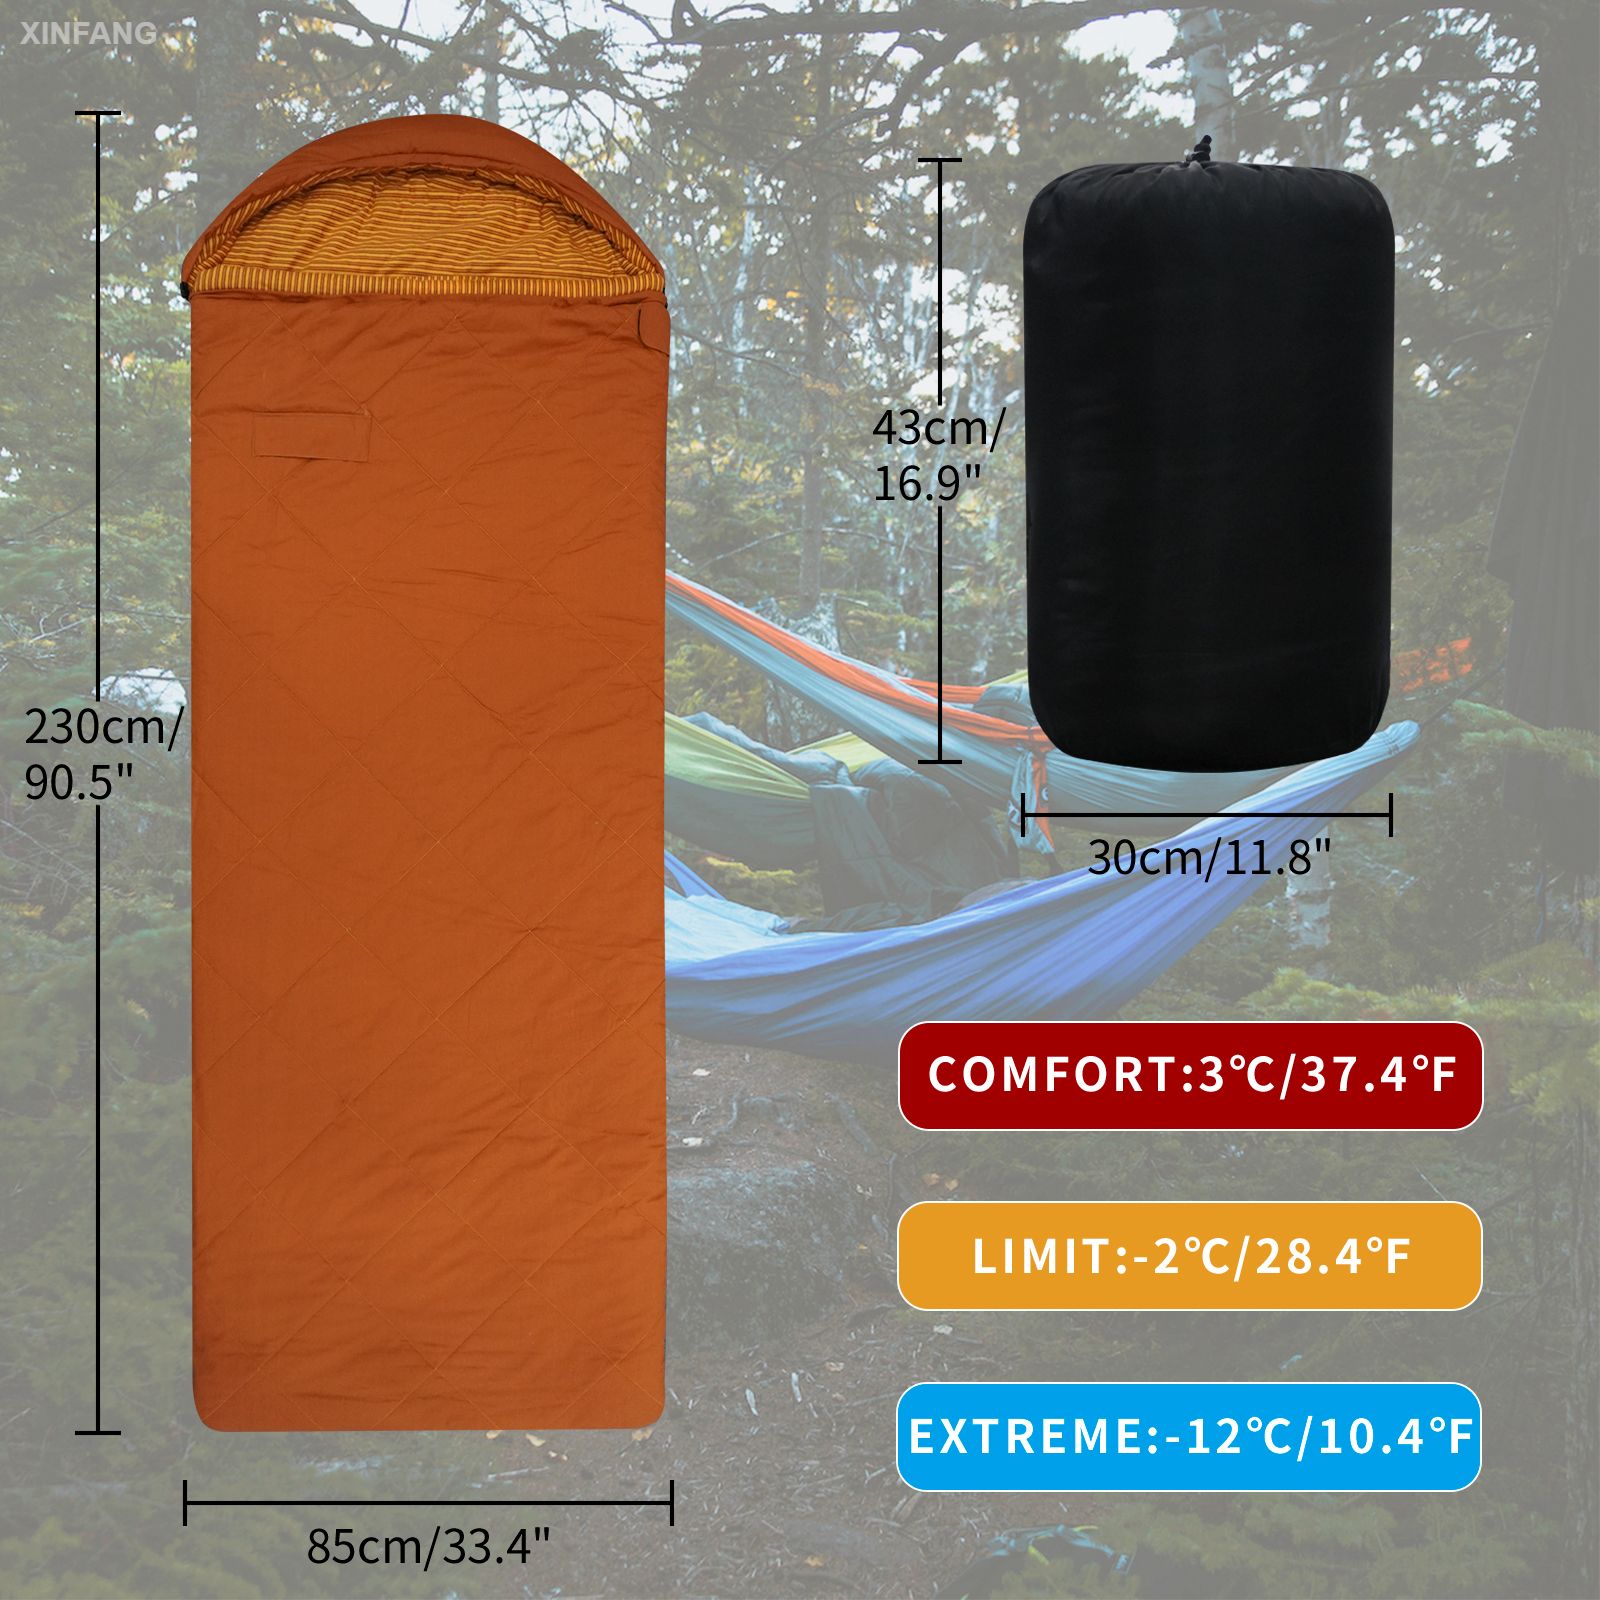 Cotton Sleeping Bag for adult Cold Weather&Warm Extra Large with Carry Bag and Detachable Hood for Camping,Travel and Backpacking